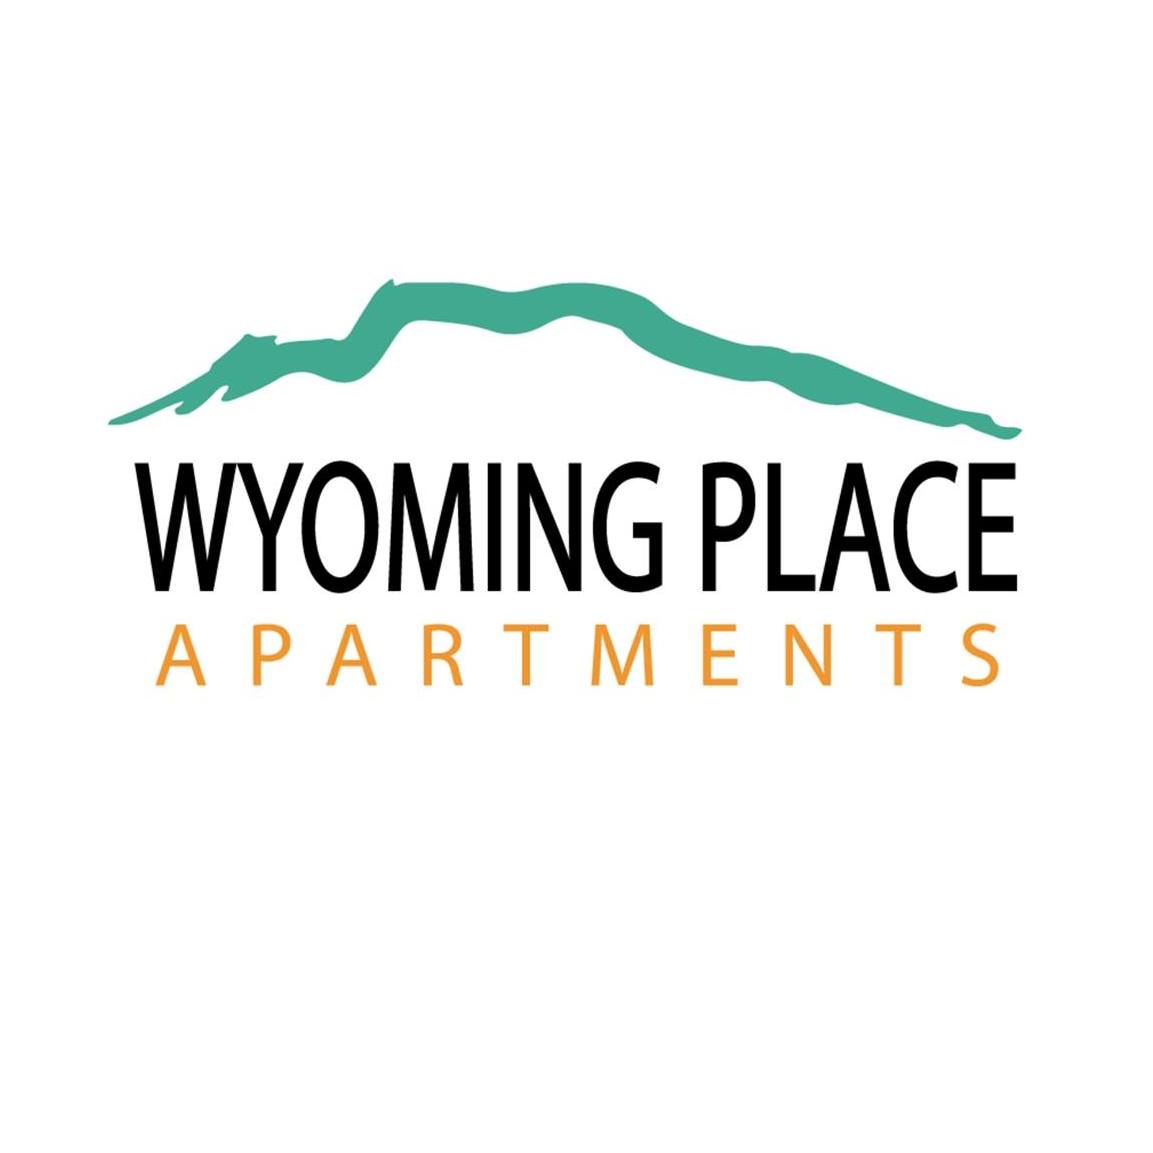 Company logo of Wyoming Place Apartments